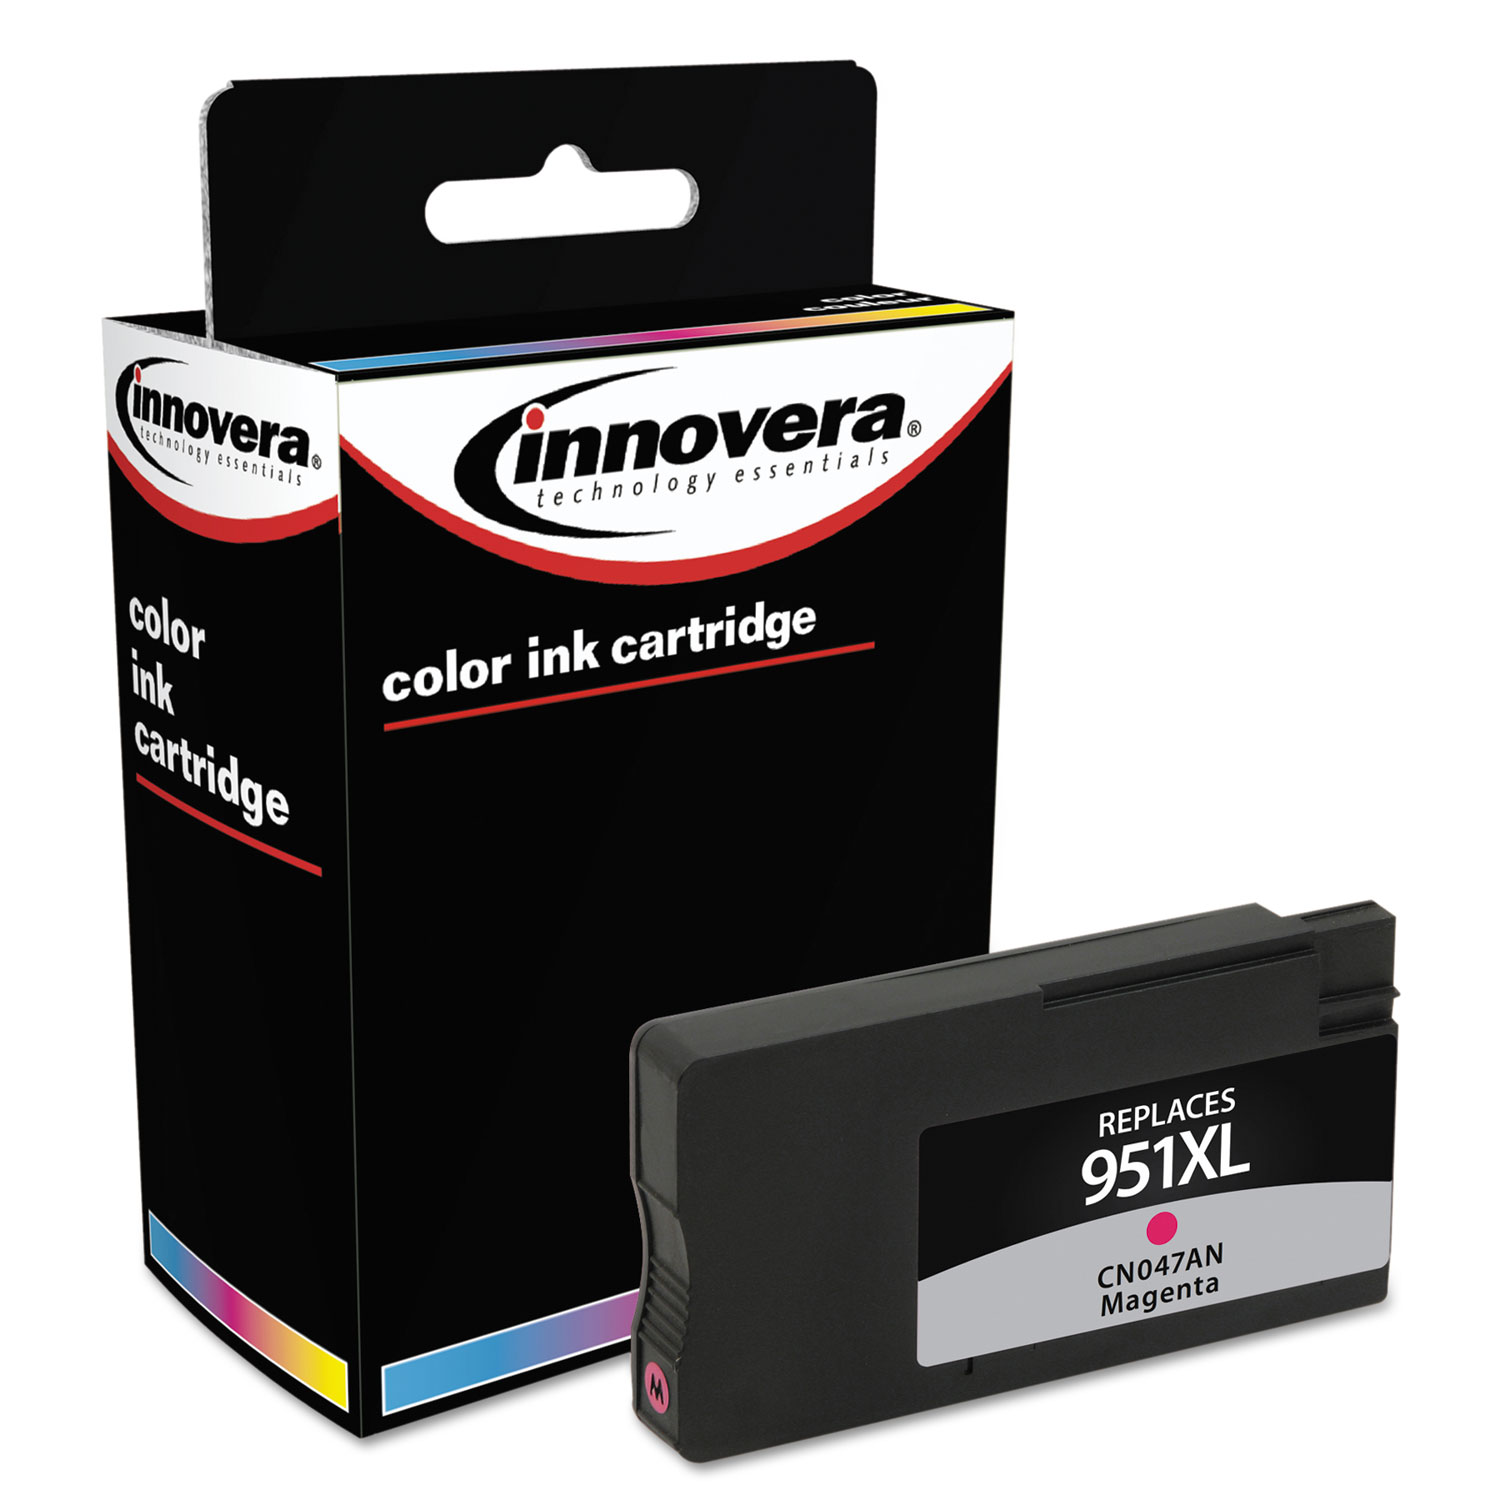 Remanufactured CN047AN (951XL) High-Yield Ink, 1500 Page-Yield, Magenta